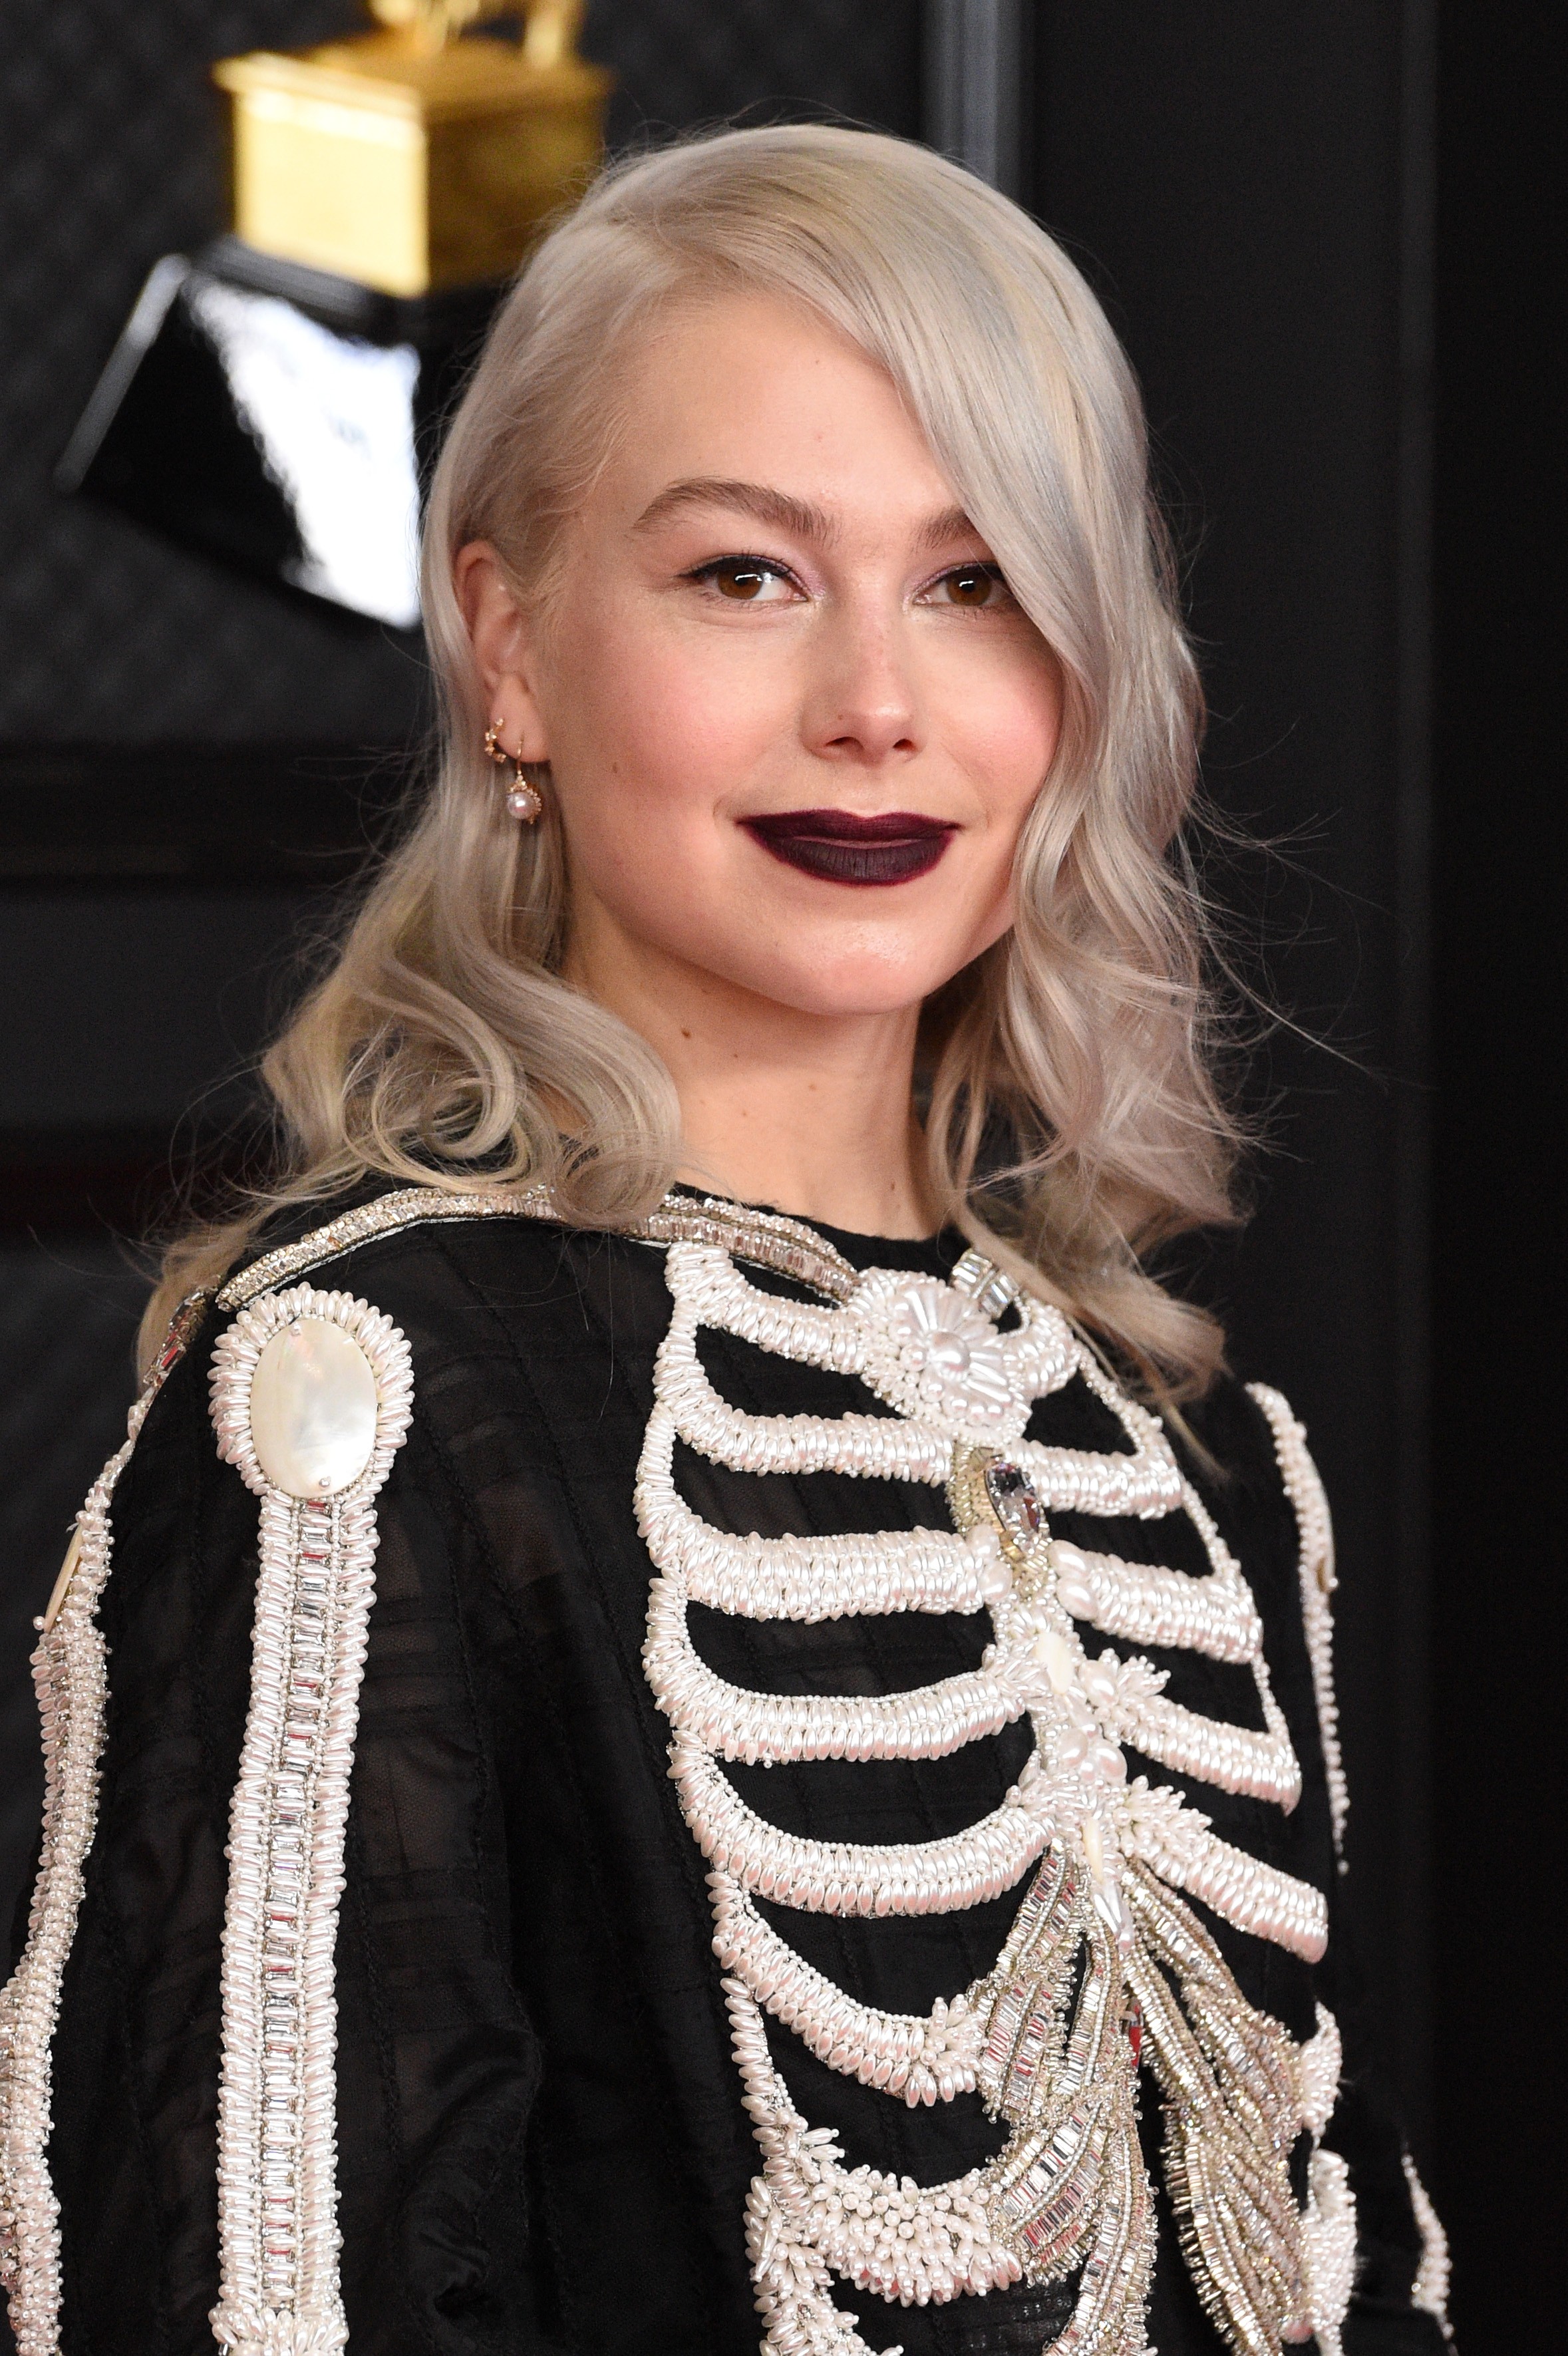 LOS ANGELES, CALIFORNIA - MARCH 14: Phoebe Bridgers attends the 63rd Annual GRAMMY Awards at Los Angeles Convention Center on March 14, 2021 in Los Angeles, California. (Photo by Kevin Mazur/Getty Images for The Recording Academy ) (Foto: Getty Images for The Recording A)